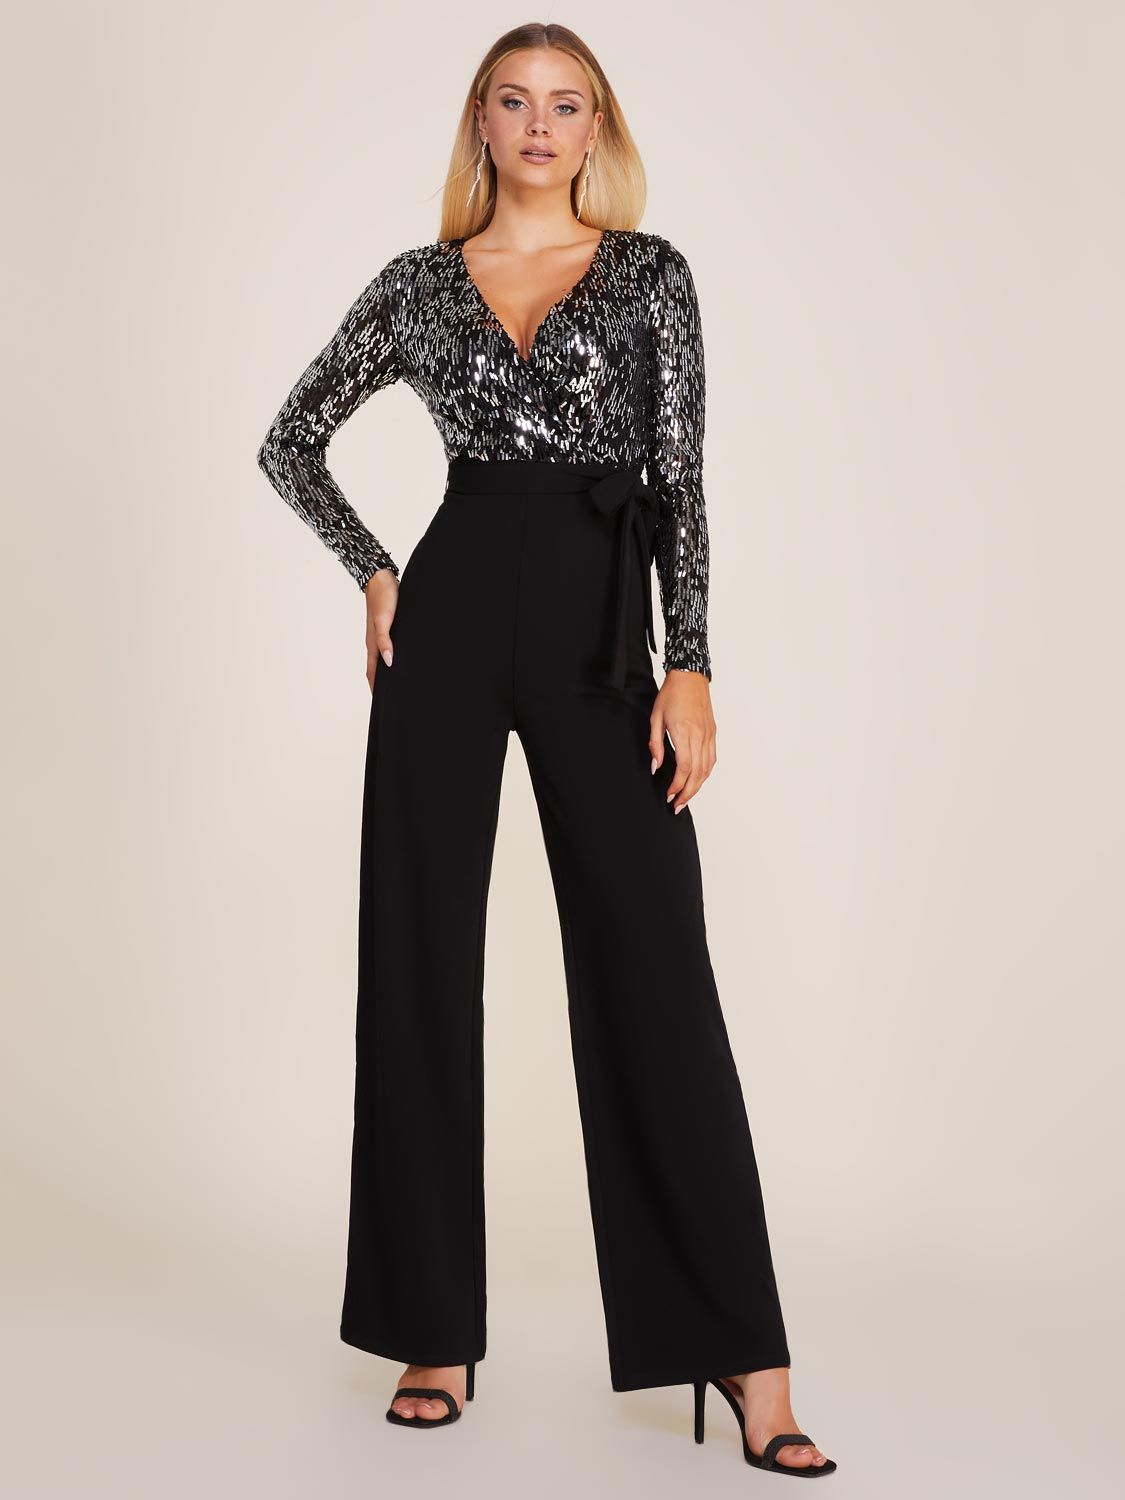 Sequins EVERYTHANG: jumpsuits, dresses, and tops — Everyday Pursuits